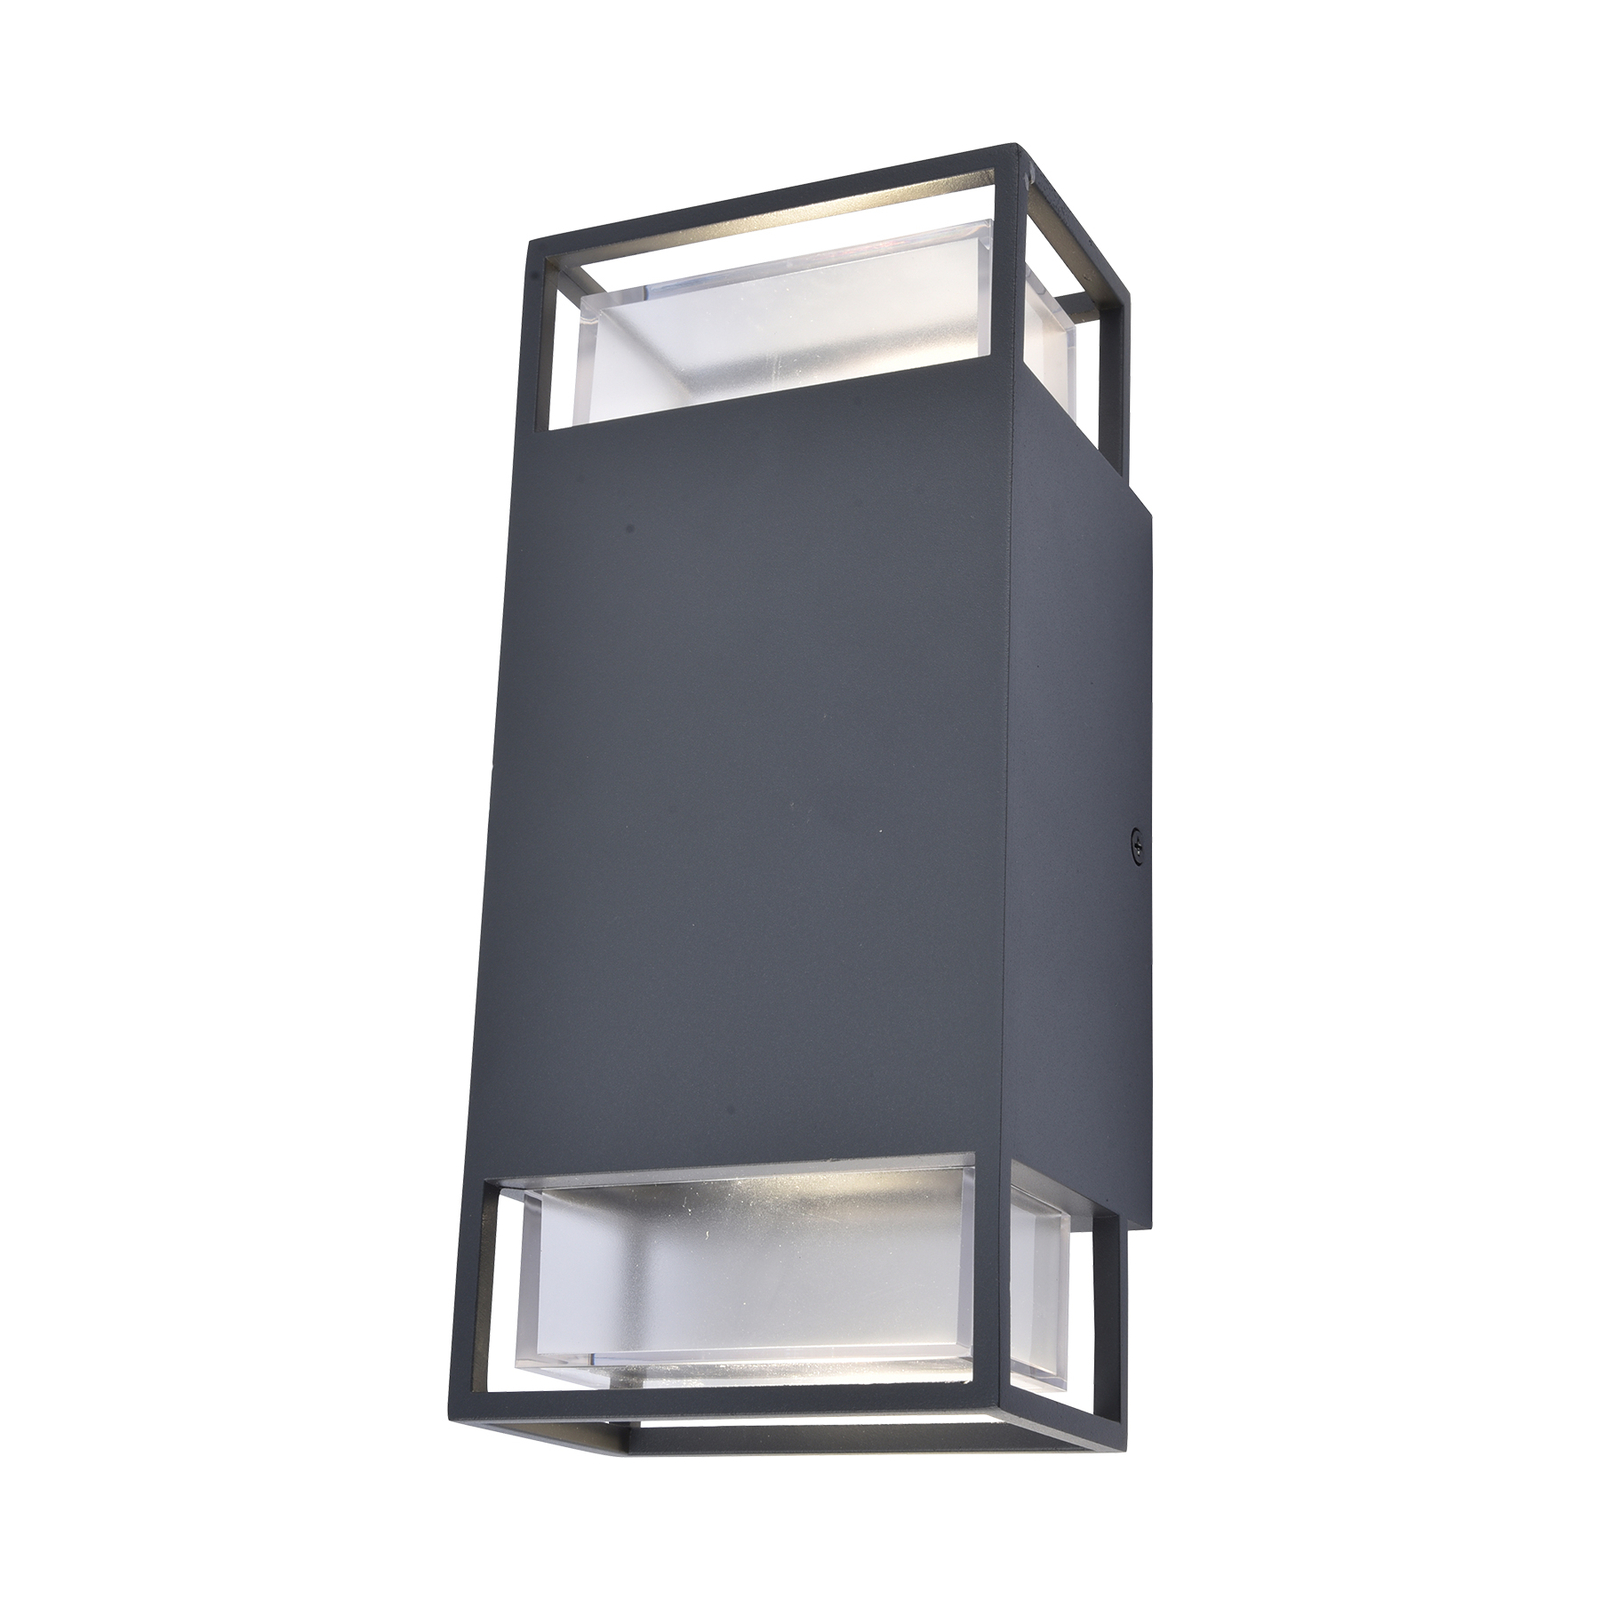 Ridge outdoor wall light up and down